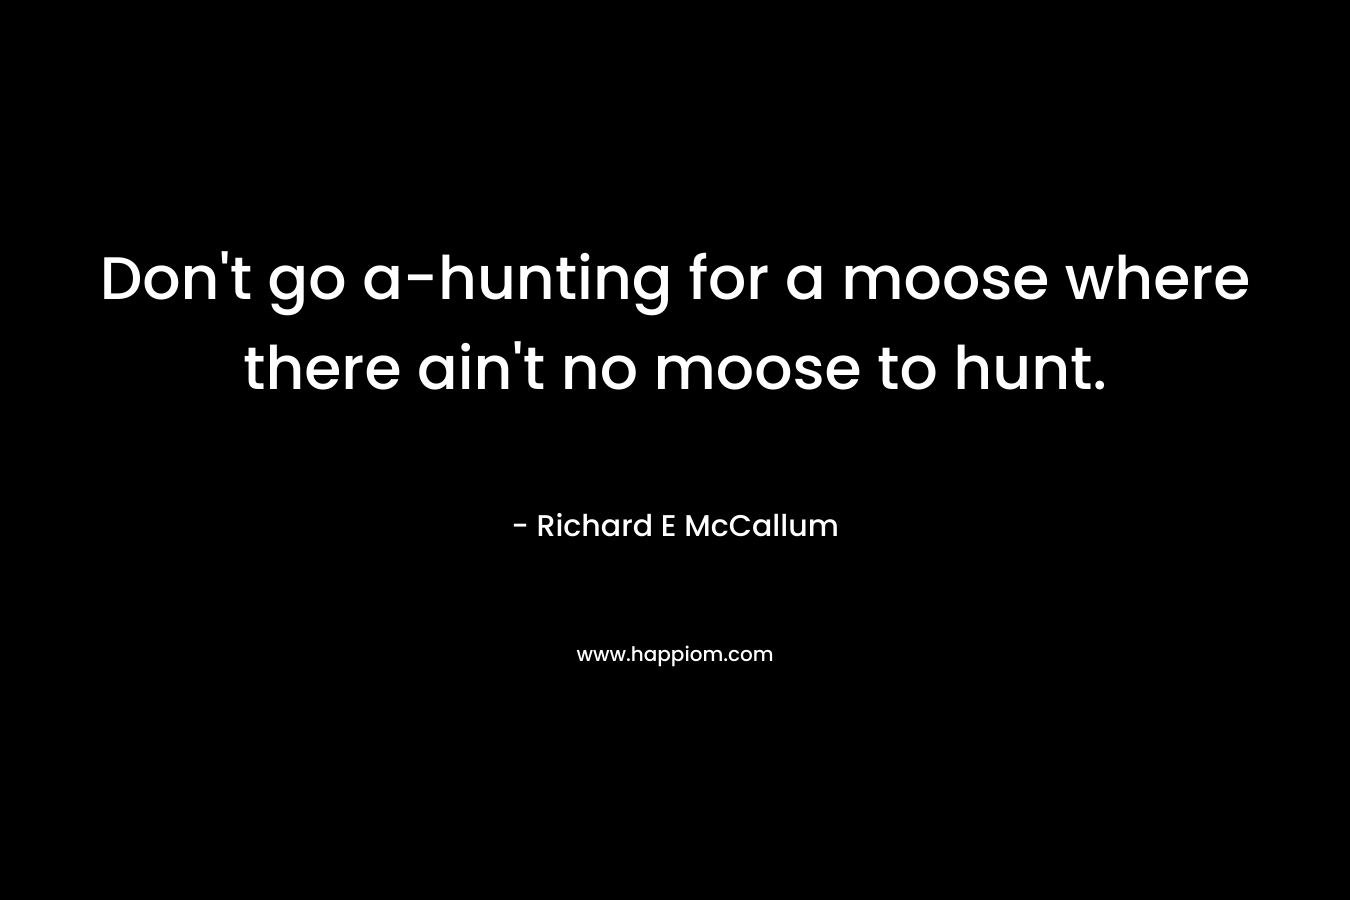 Don’t go a-hunting for a moose where there ain’t no moose to hunt. – Richard E McCallum